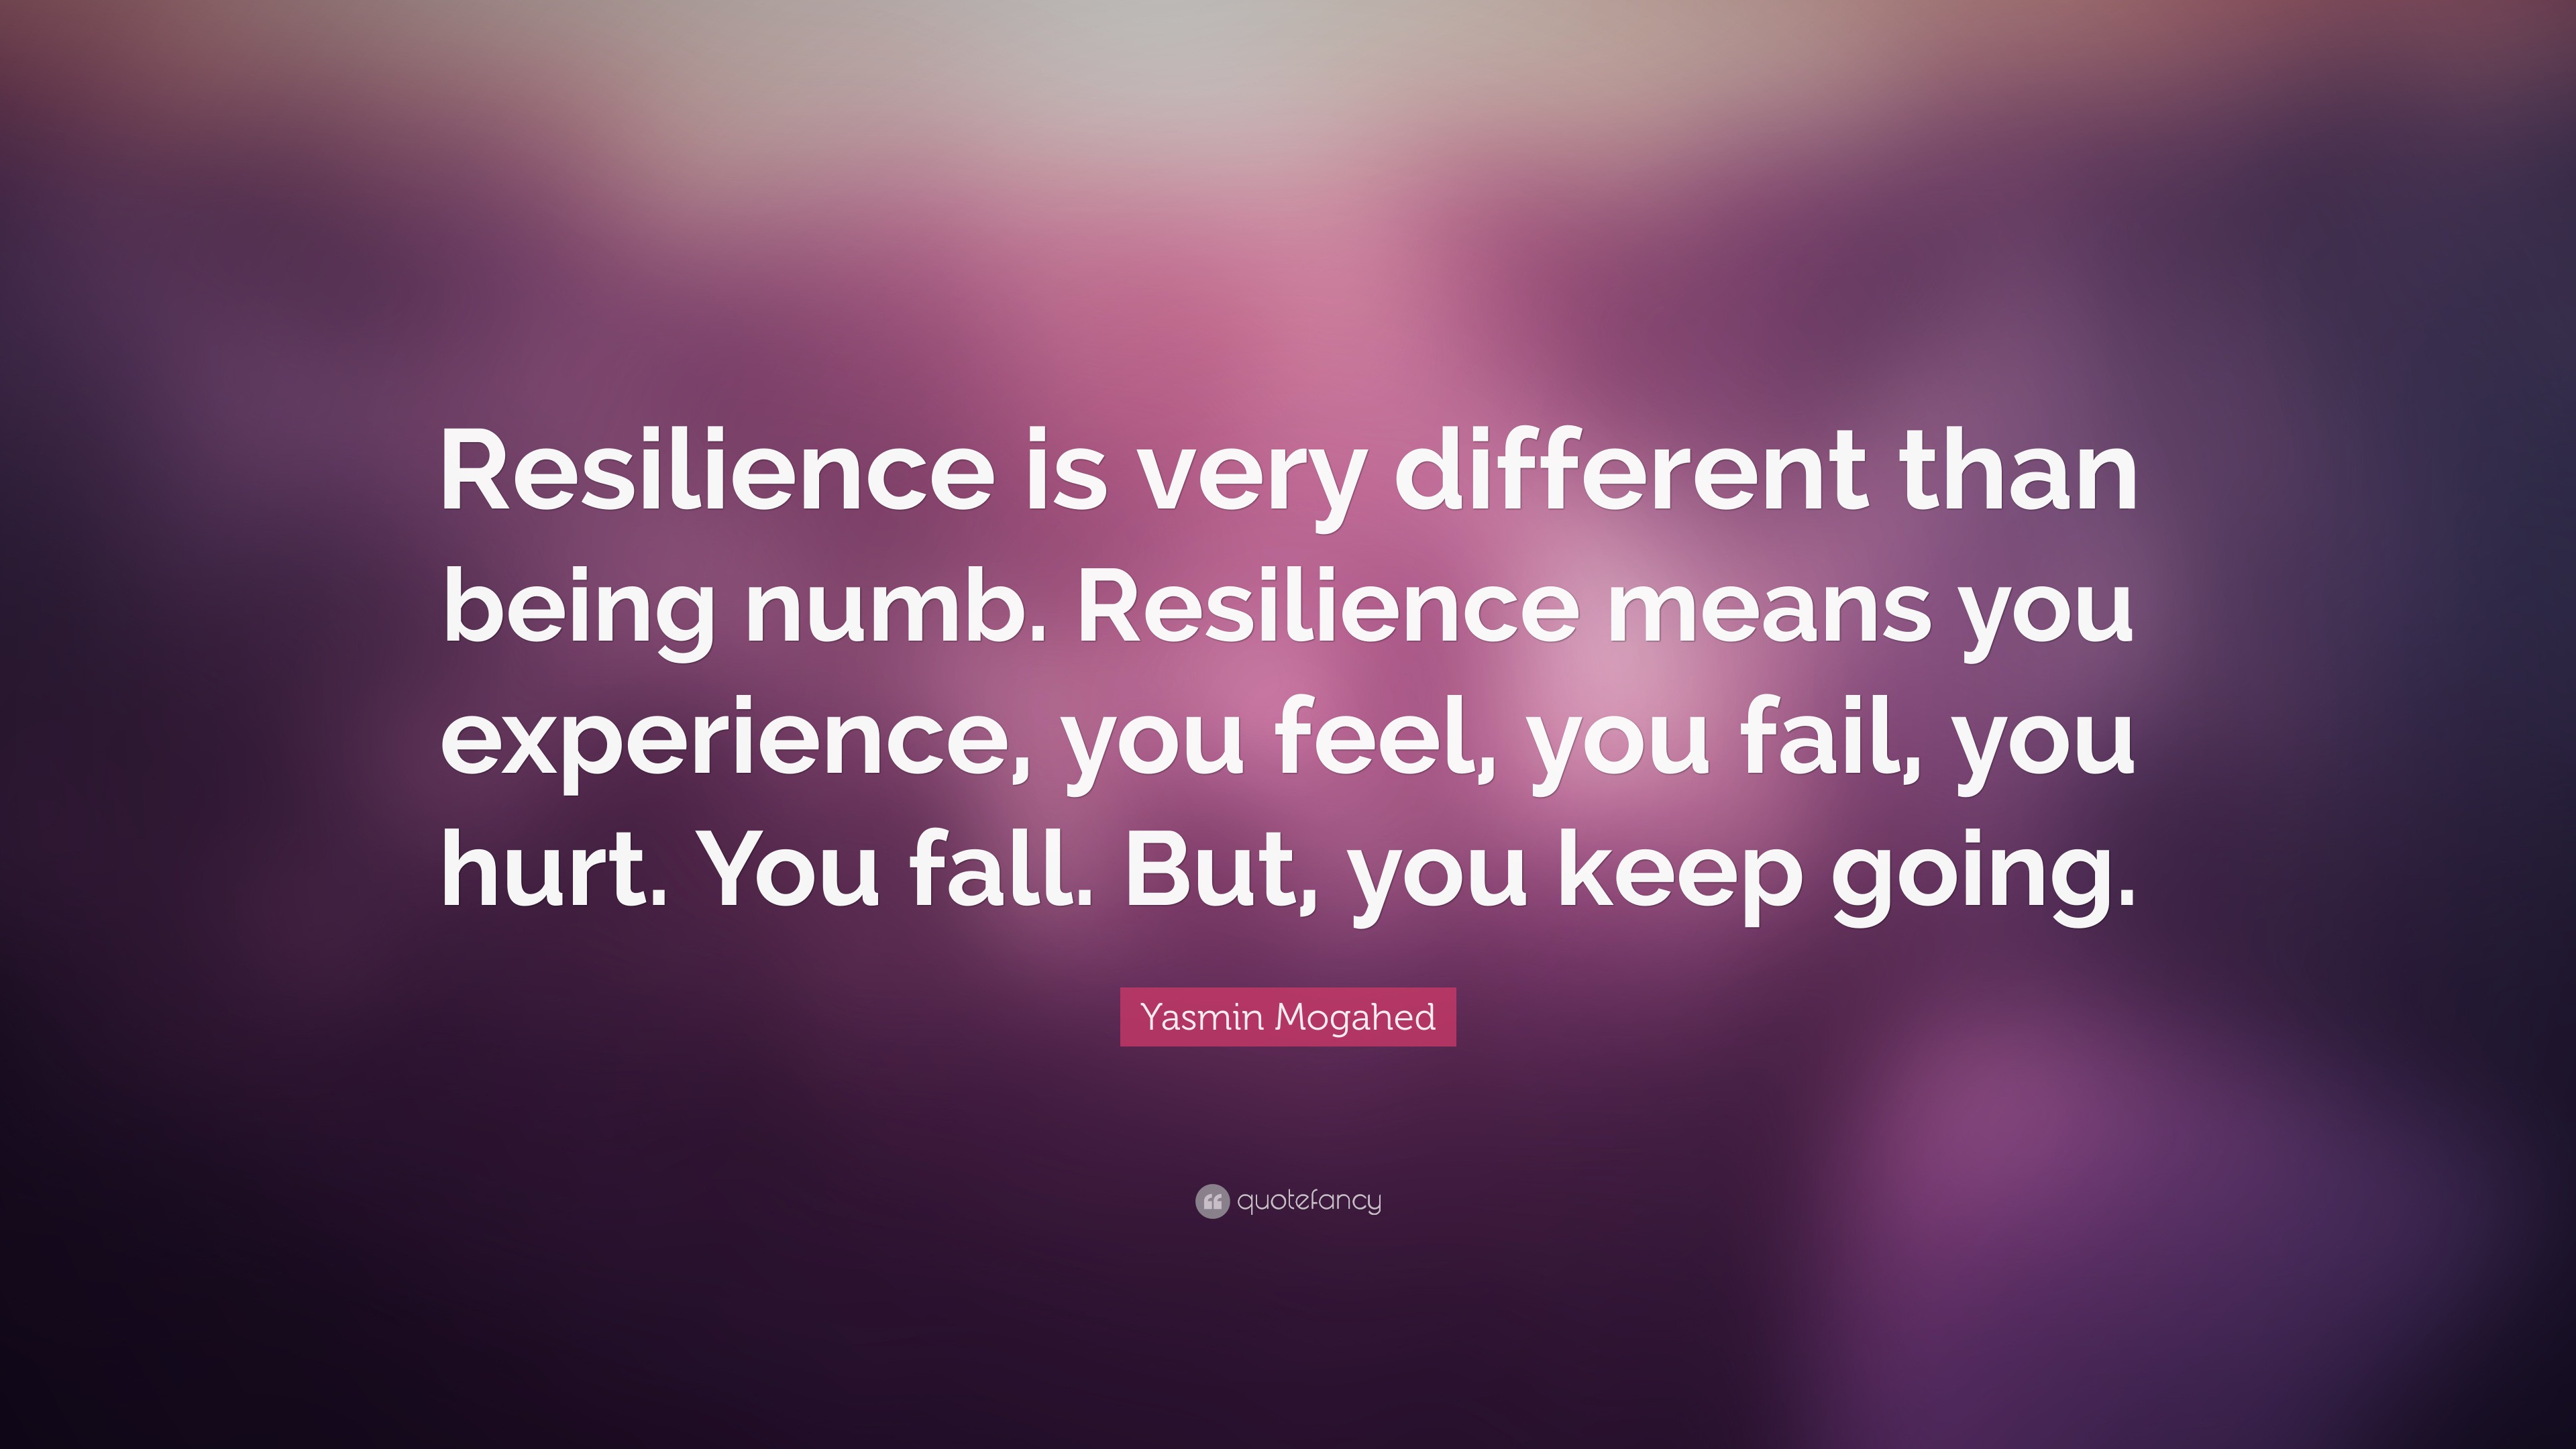 Yasmin Mogahed Quote: “Resilience is very different than being numb